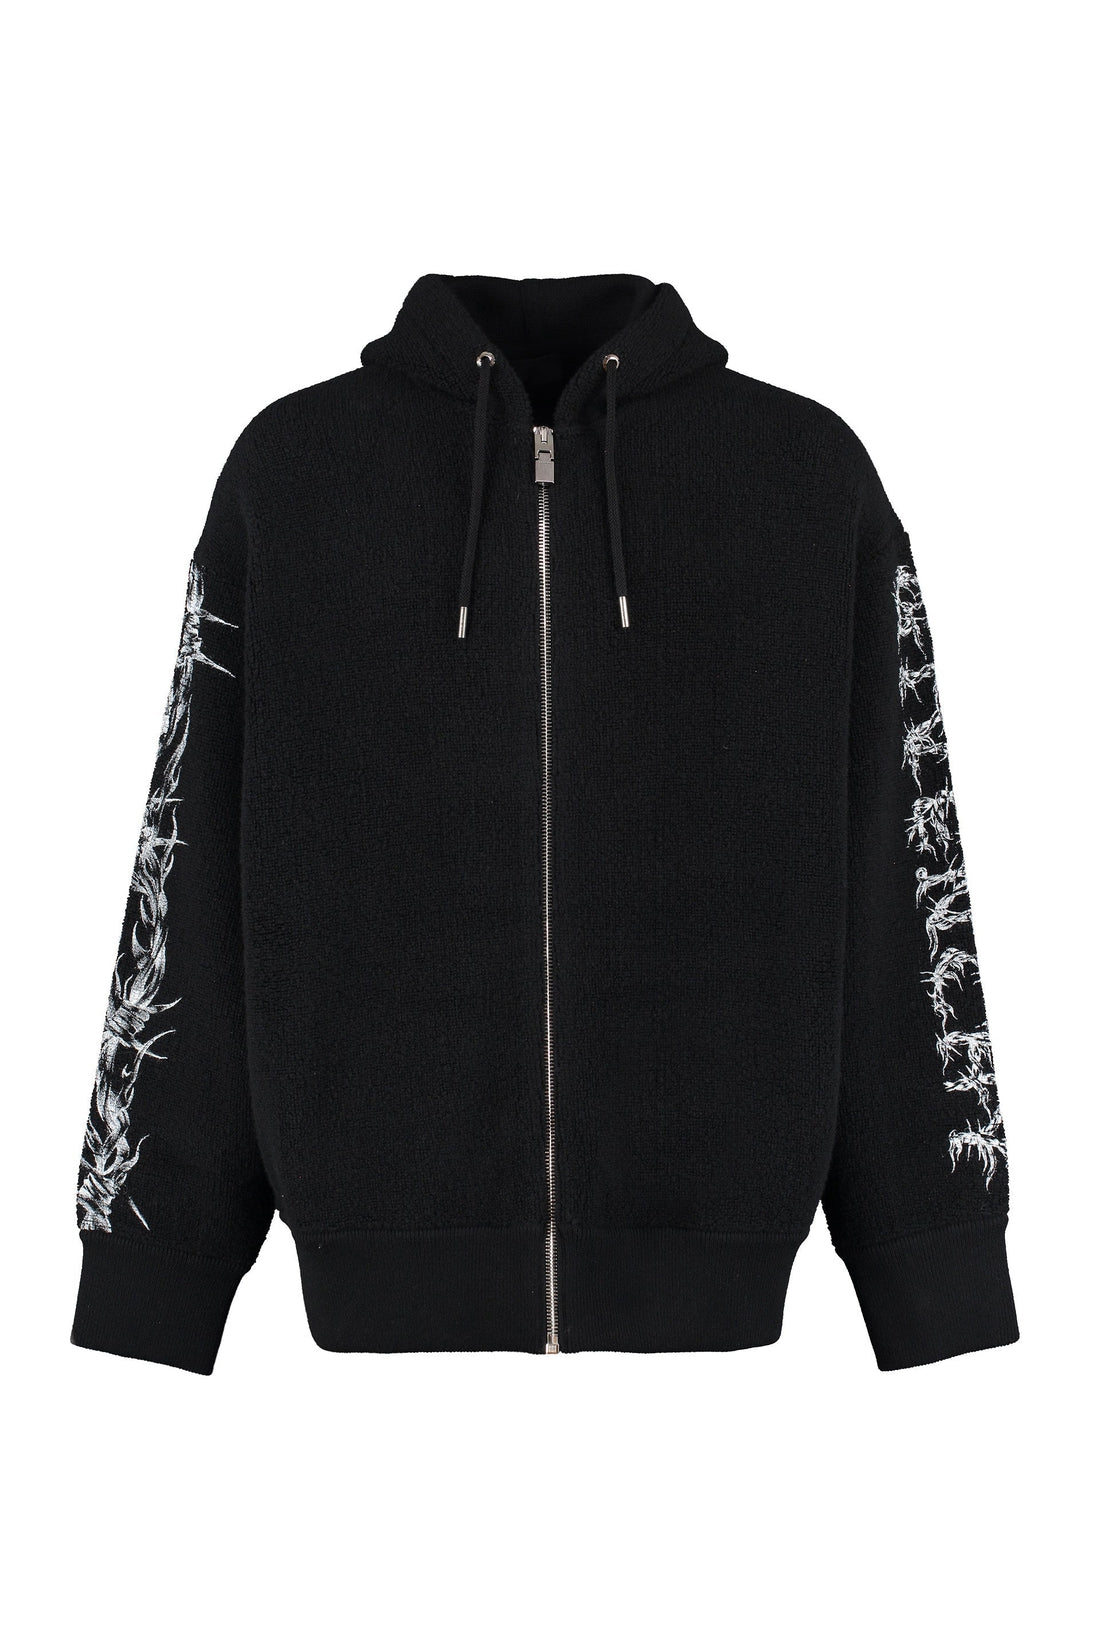 Givenchy-OUTLET-SALE-Knitted full zip hoodie-ARCHIVIST